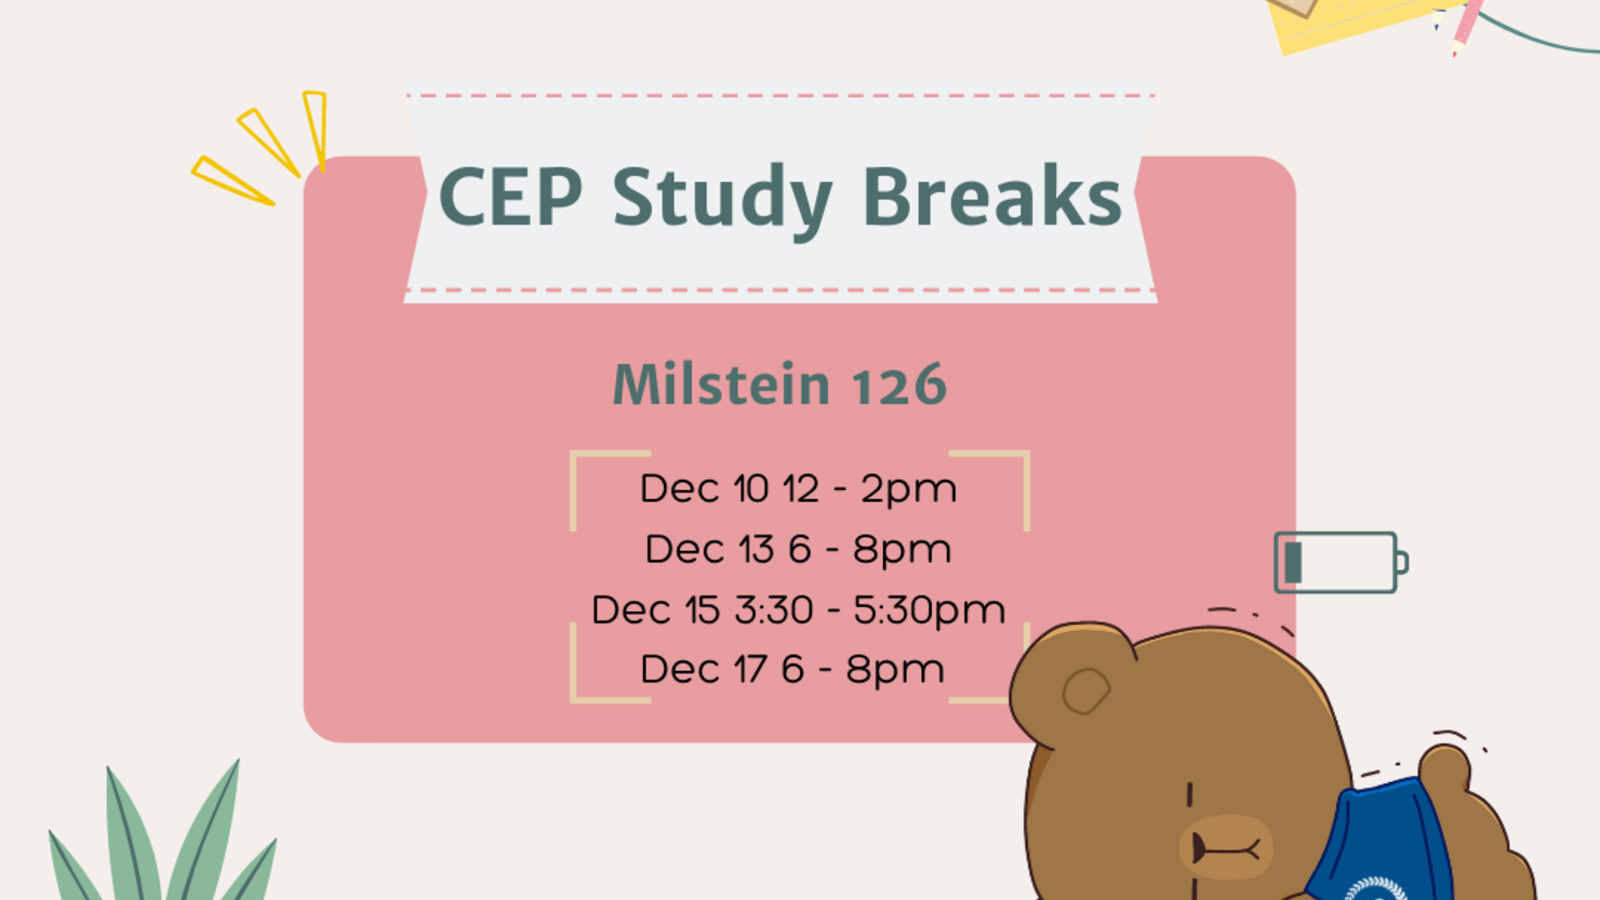 A bear sleeps next to a list of times where students can stop by the CEP for a study break. The times are also copied in the text below.